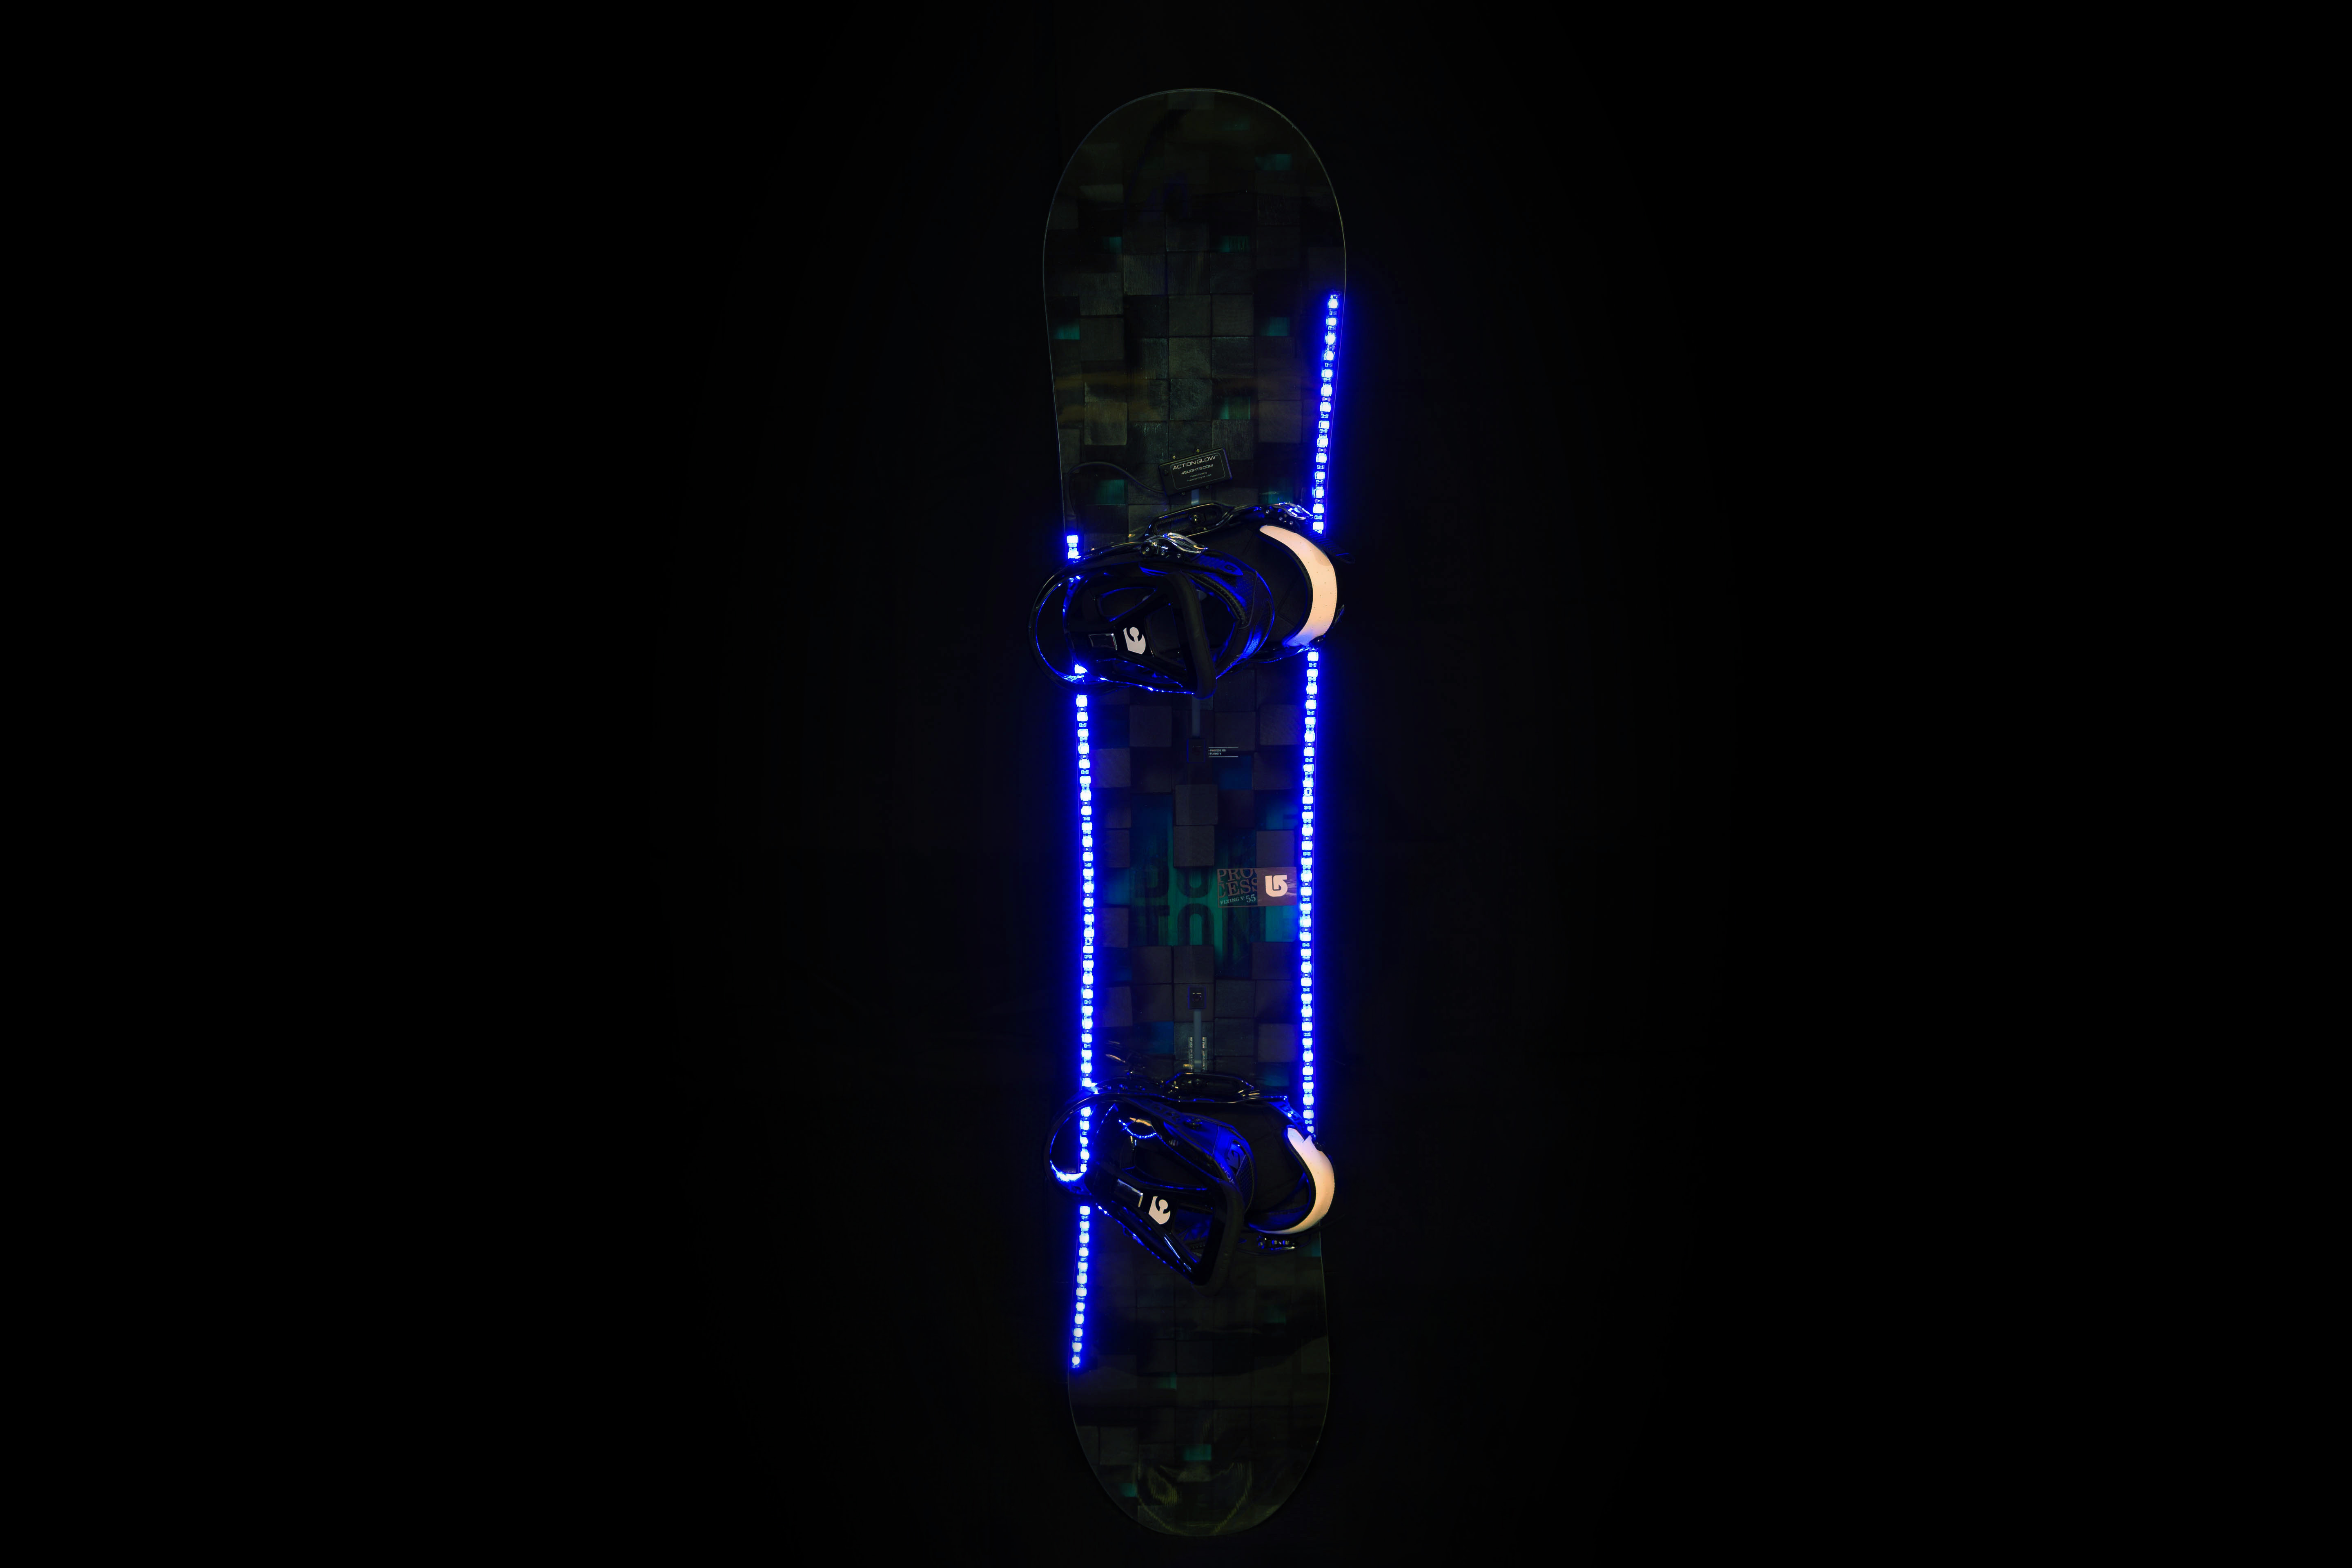 The new Snowboard LED Lighting Kits can be purchased at a discounted price on Kickstarter for $79, and will be shipped anywhere in the world.